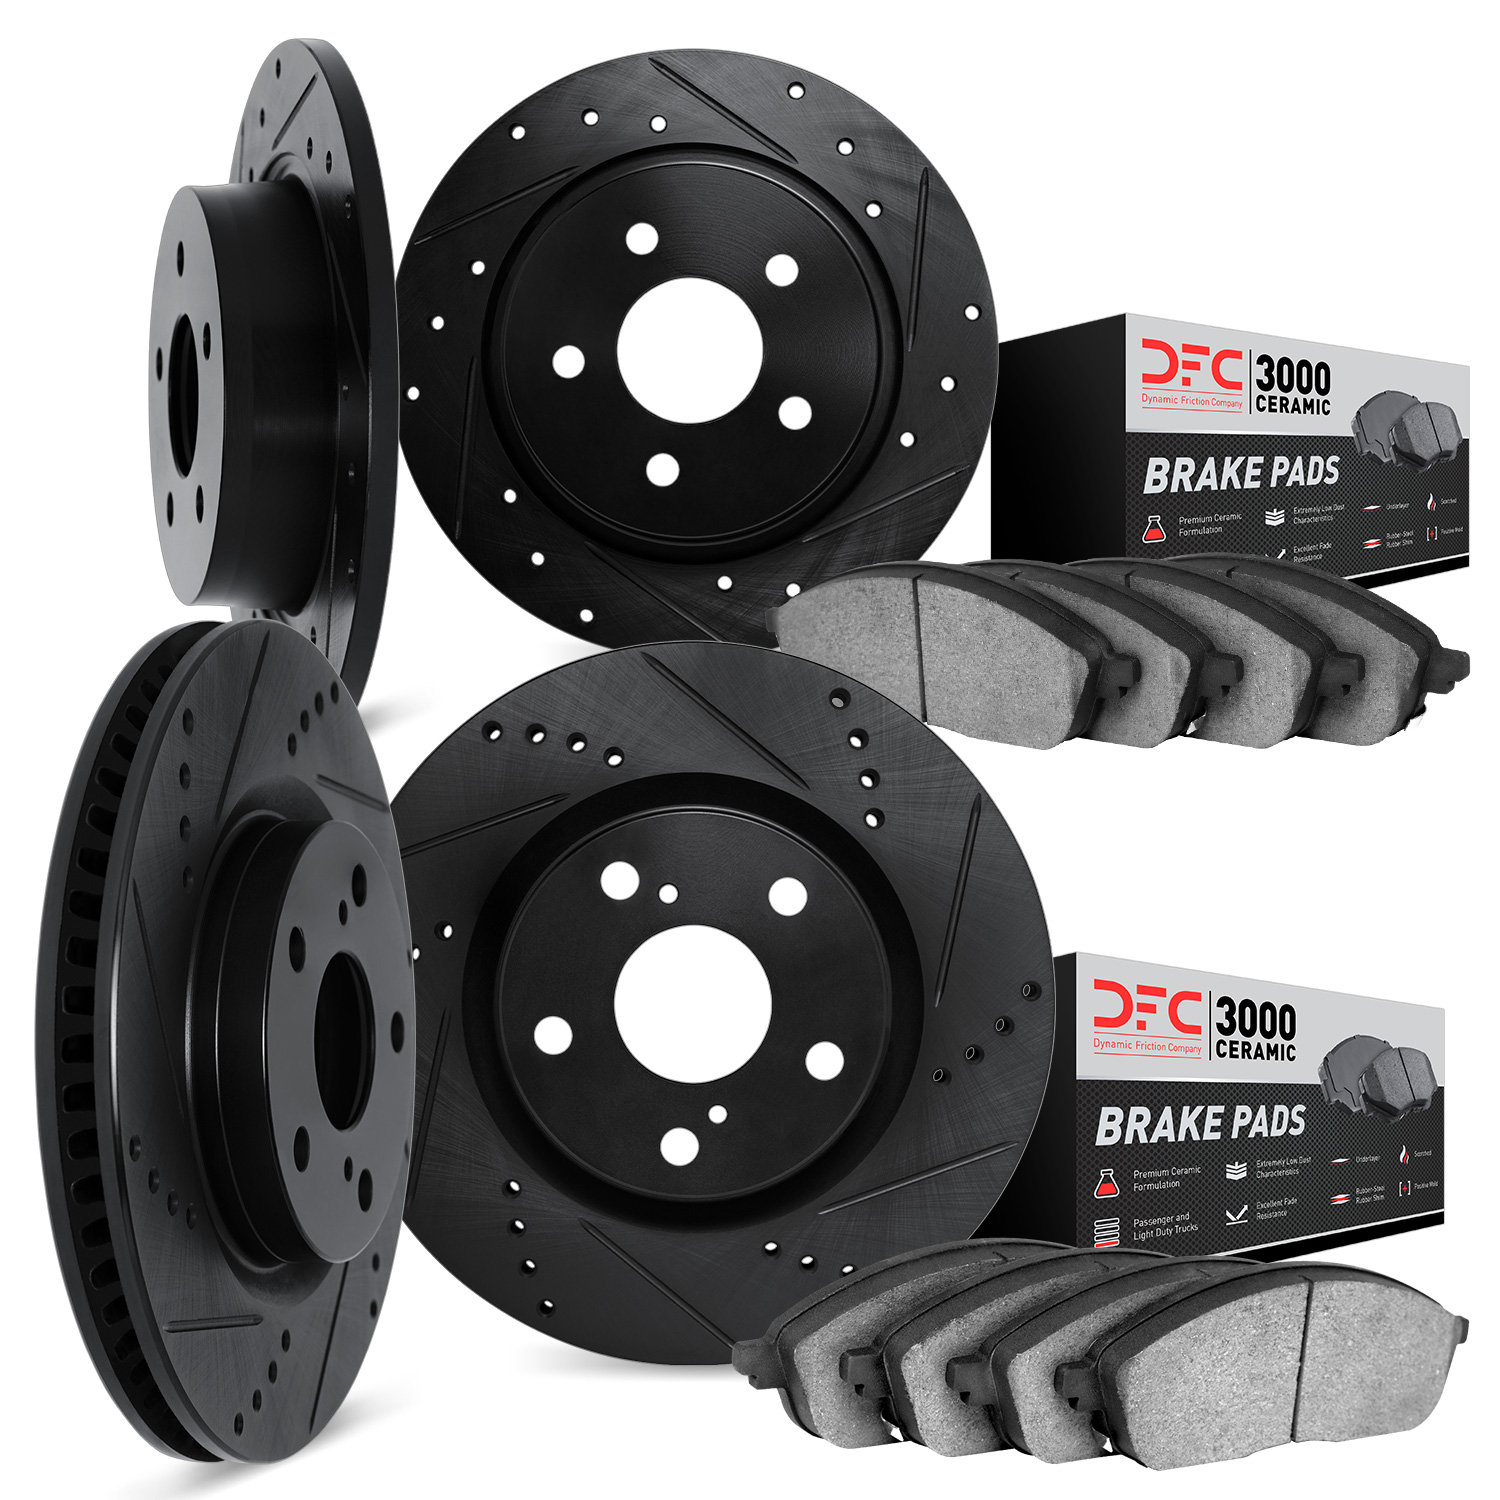 8304-63080 Drilled/Slotted Brake Rotors with 3000-Series Ceramic Brake Pads Kit [Black], 1998-2005 Mercedes-Benz, Position: Fron